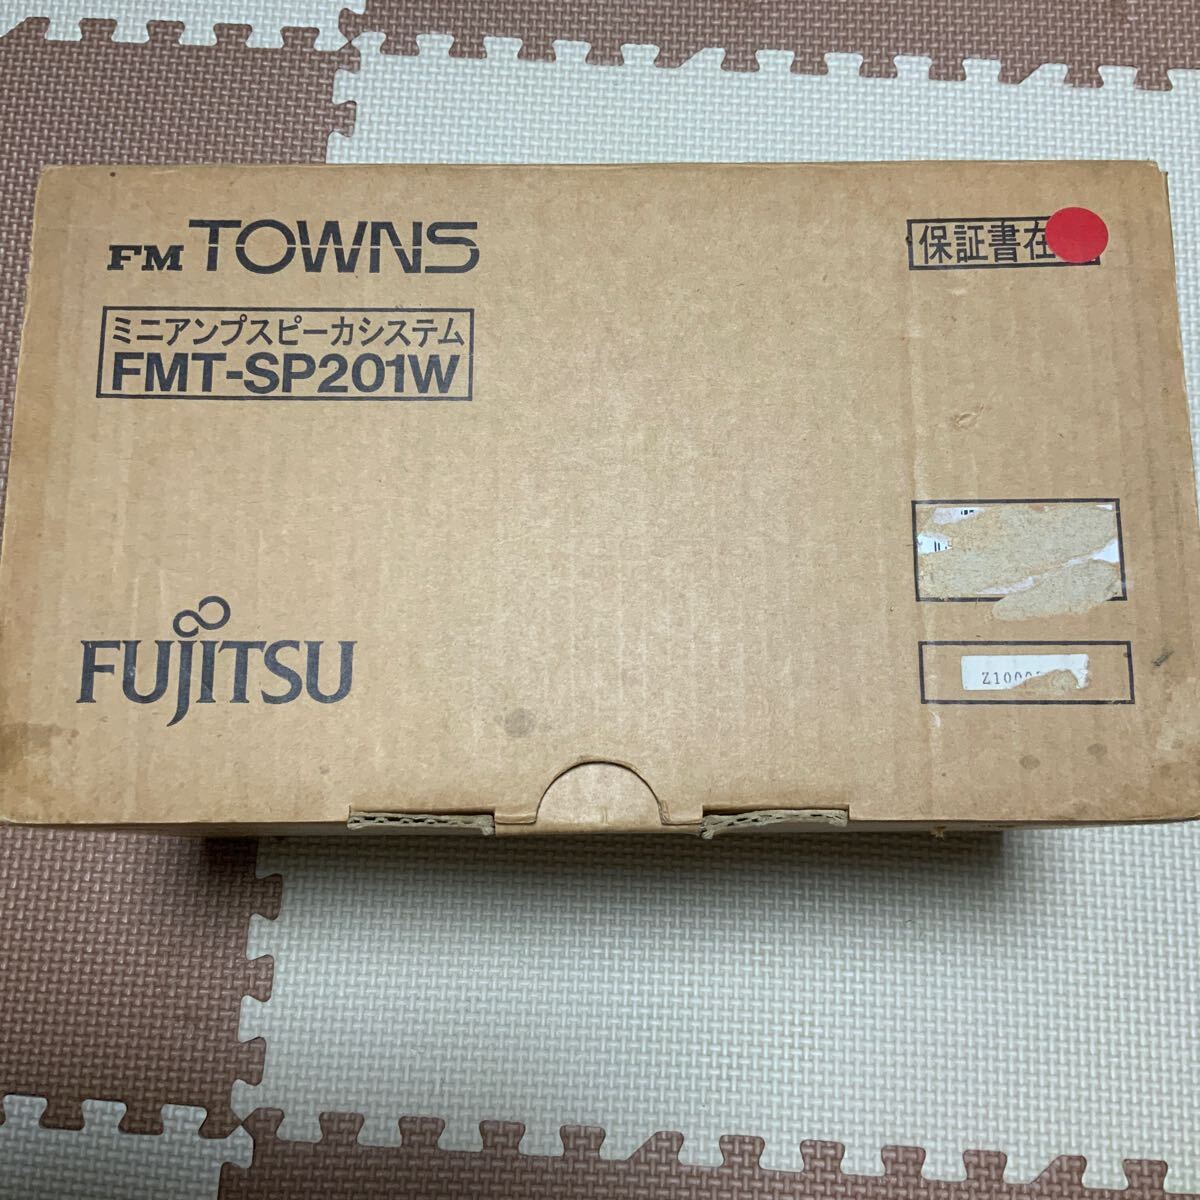 FM TOWNS Mini amplifier speaker system FMT-SP201W original box * manual equipping operation goods beautiful goods 